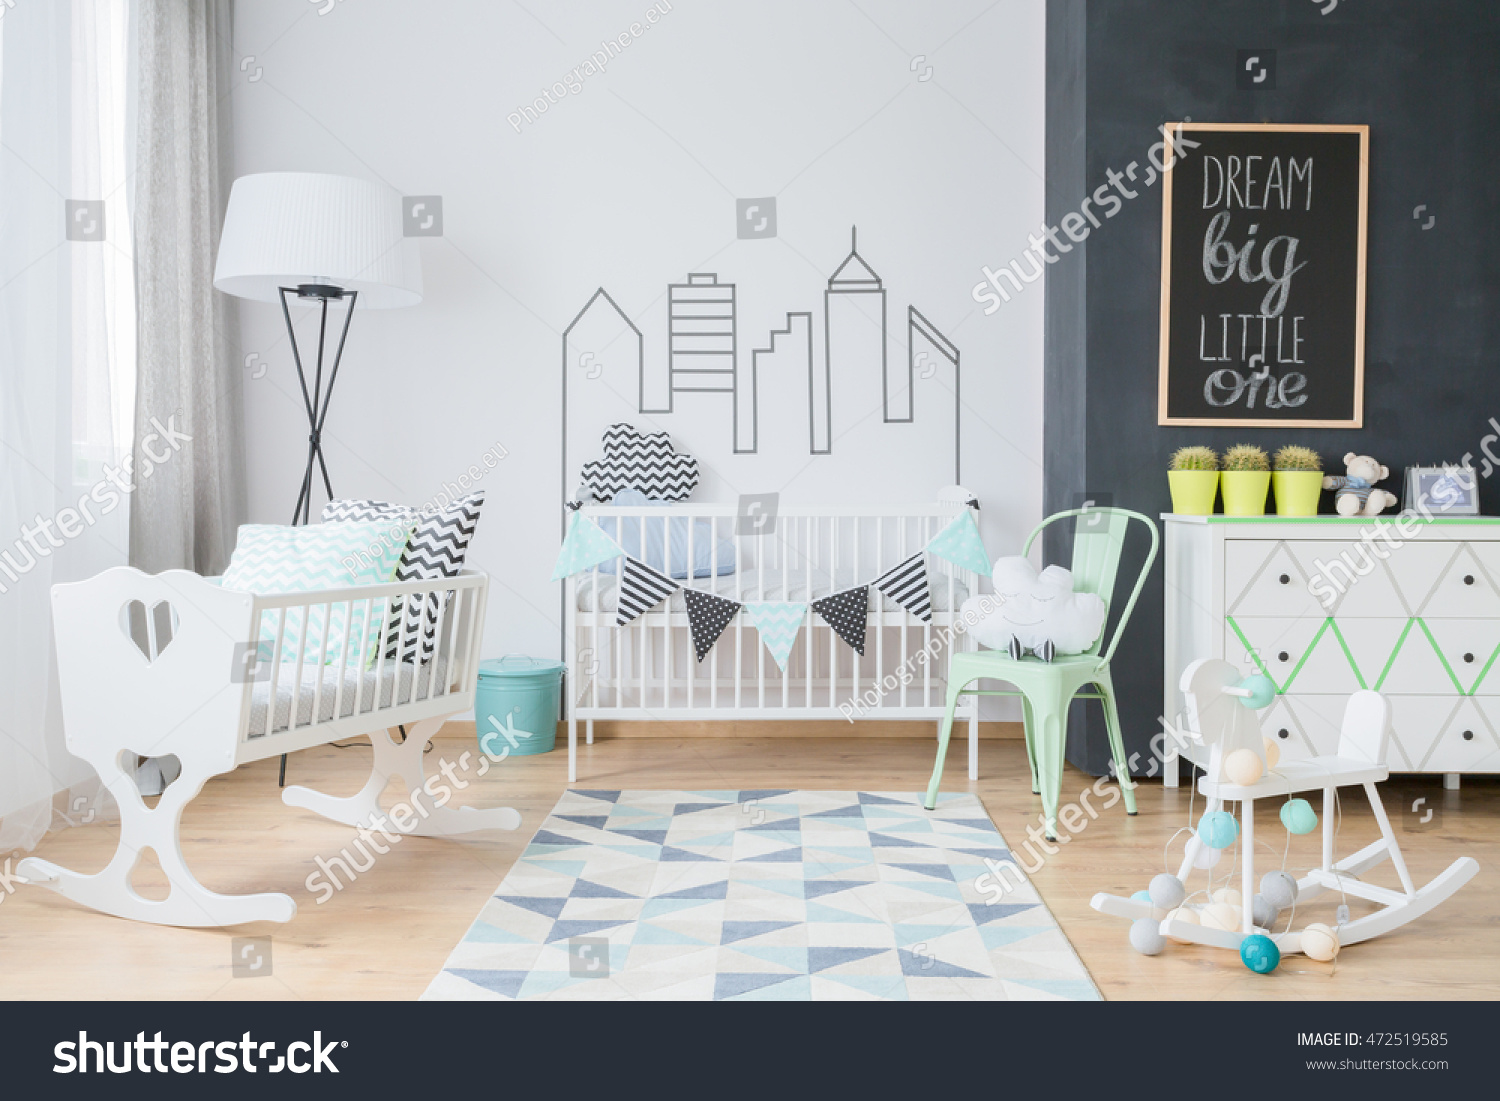 Modern baby room interior with cod, cradle, cockhorse and mint decorations #472519585